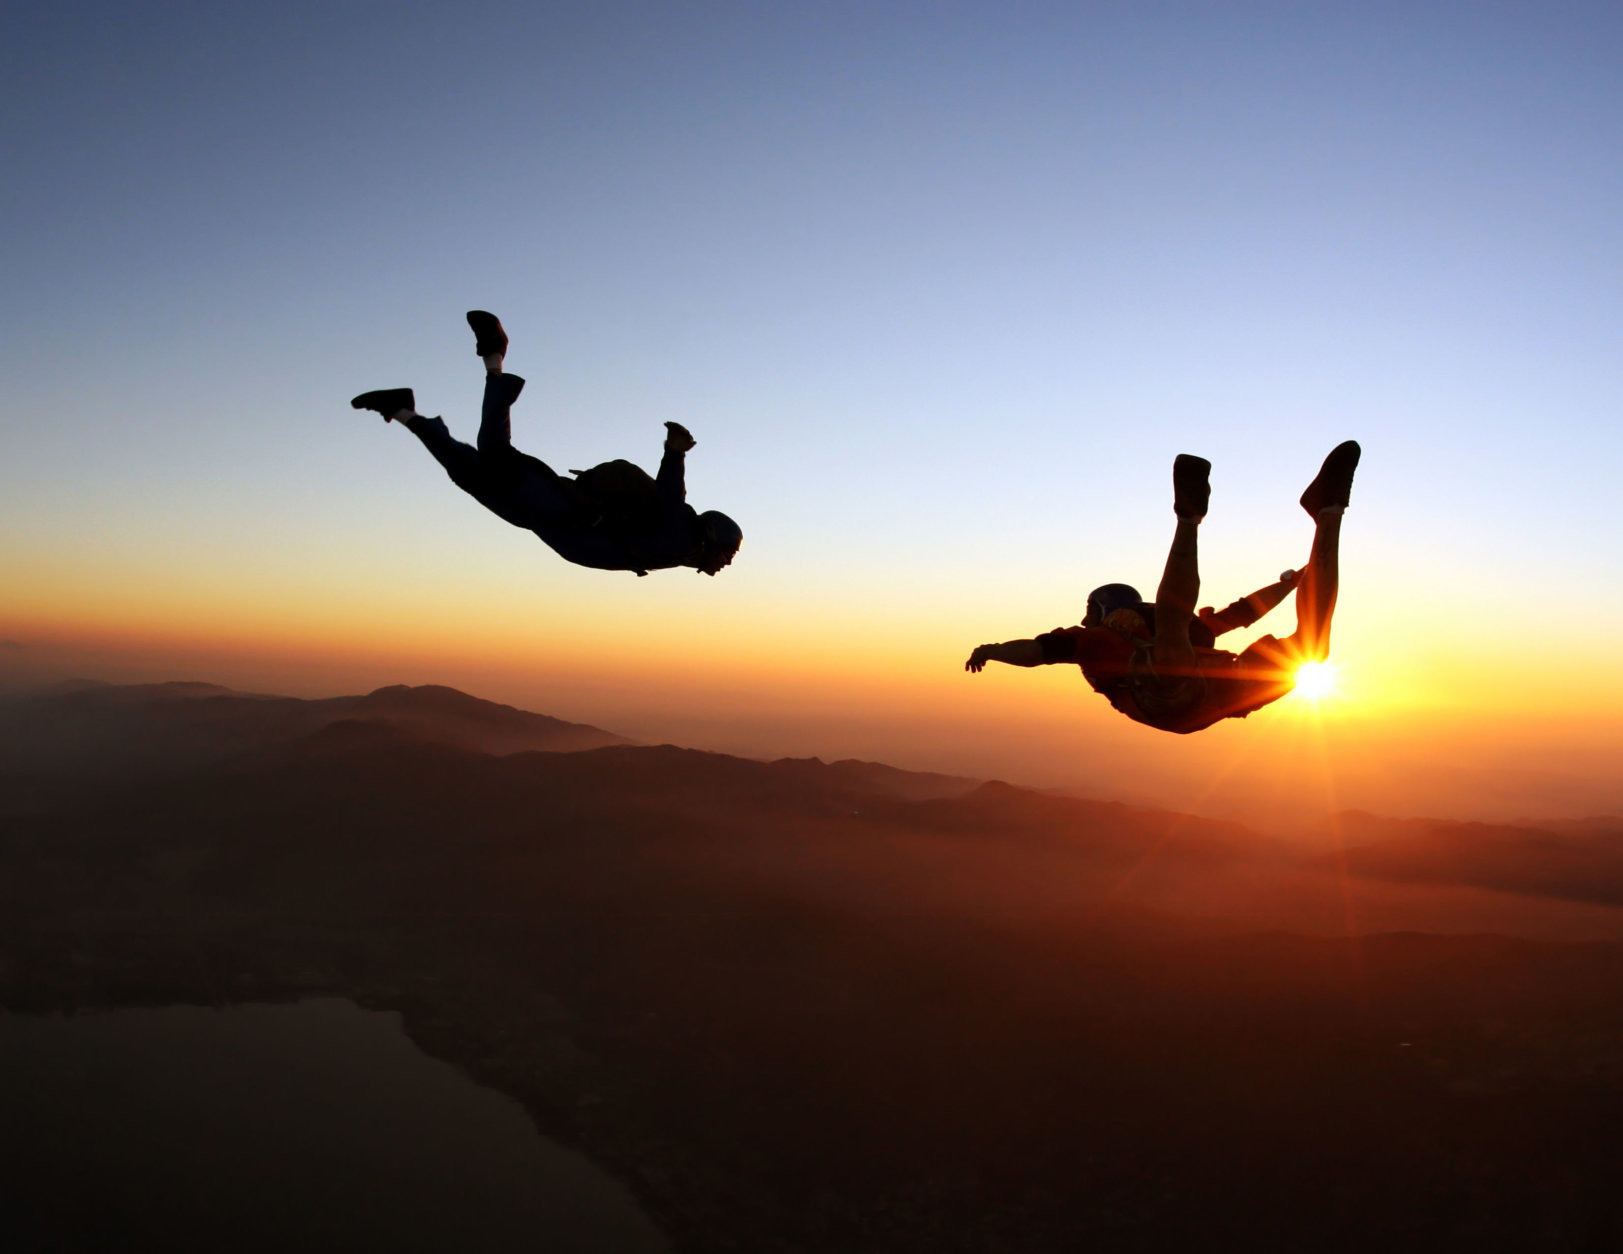 Amazing skydiving at the sunset